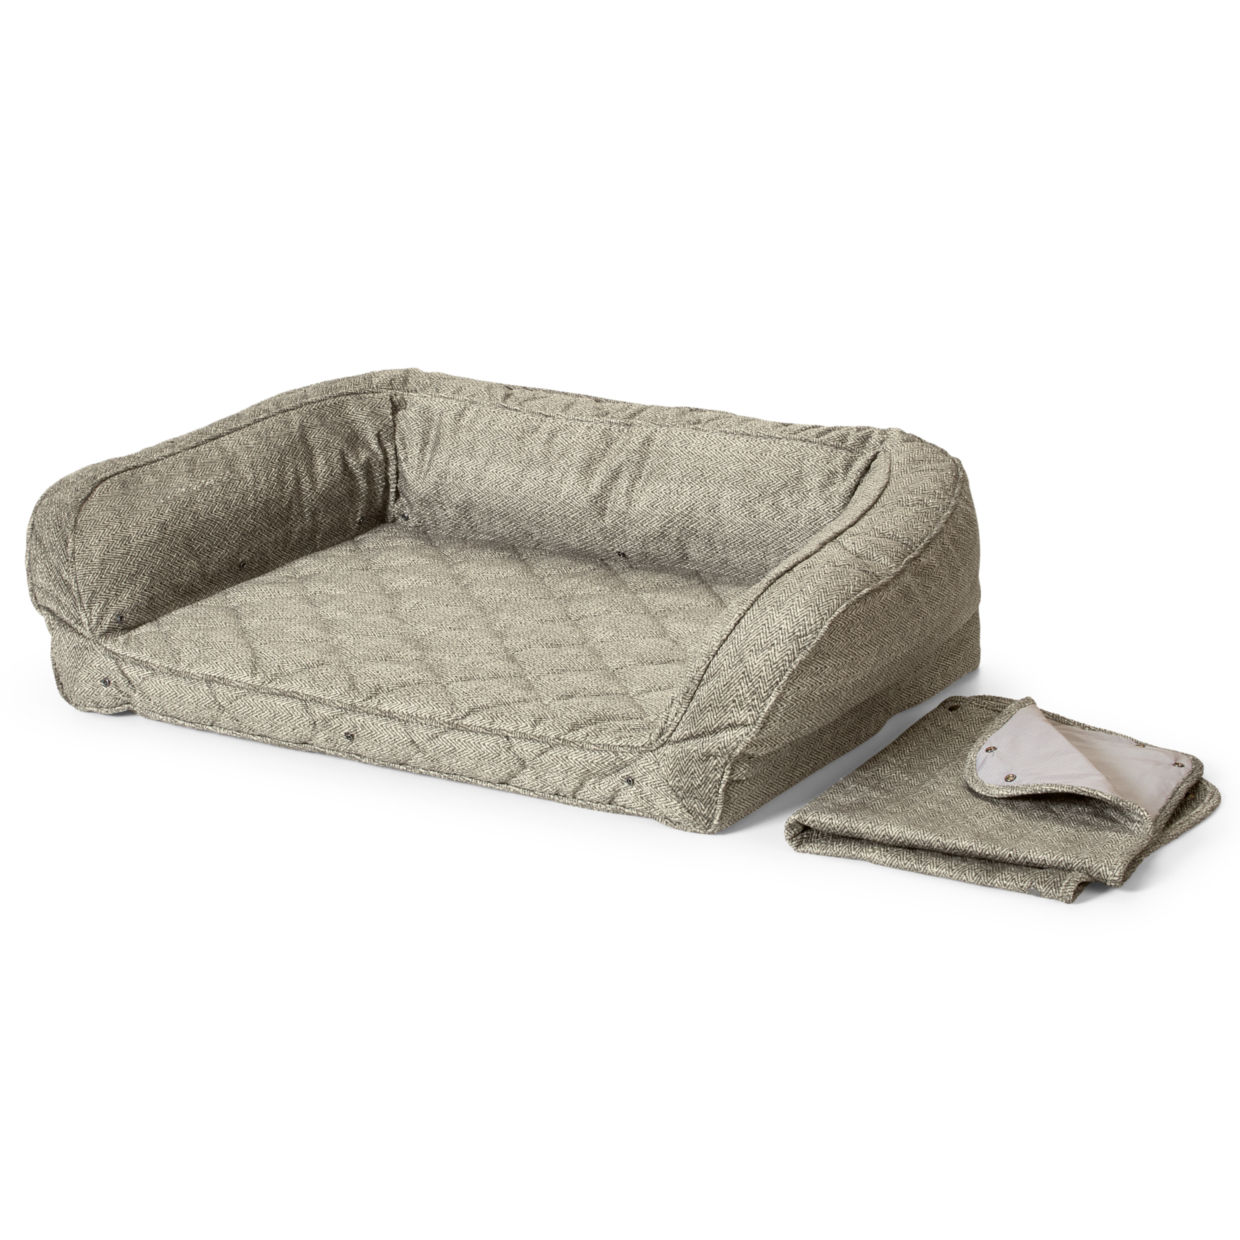 Orvis AirFoam Bolster Dog Bed with Snap-Off Pads